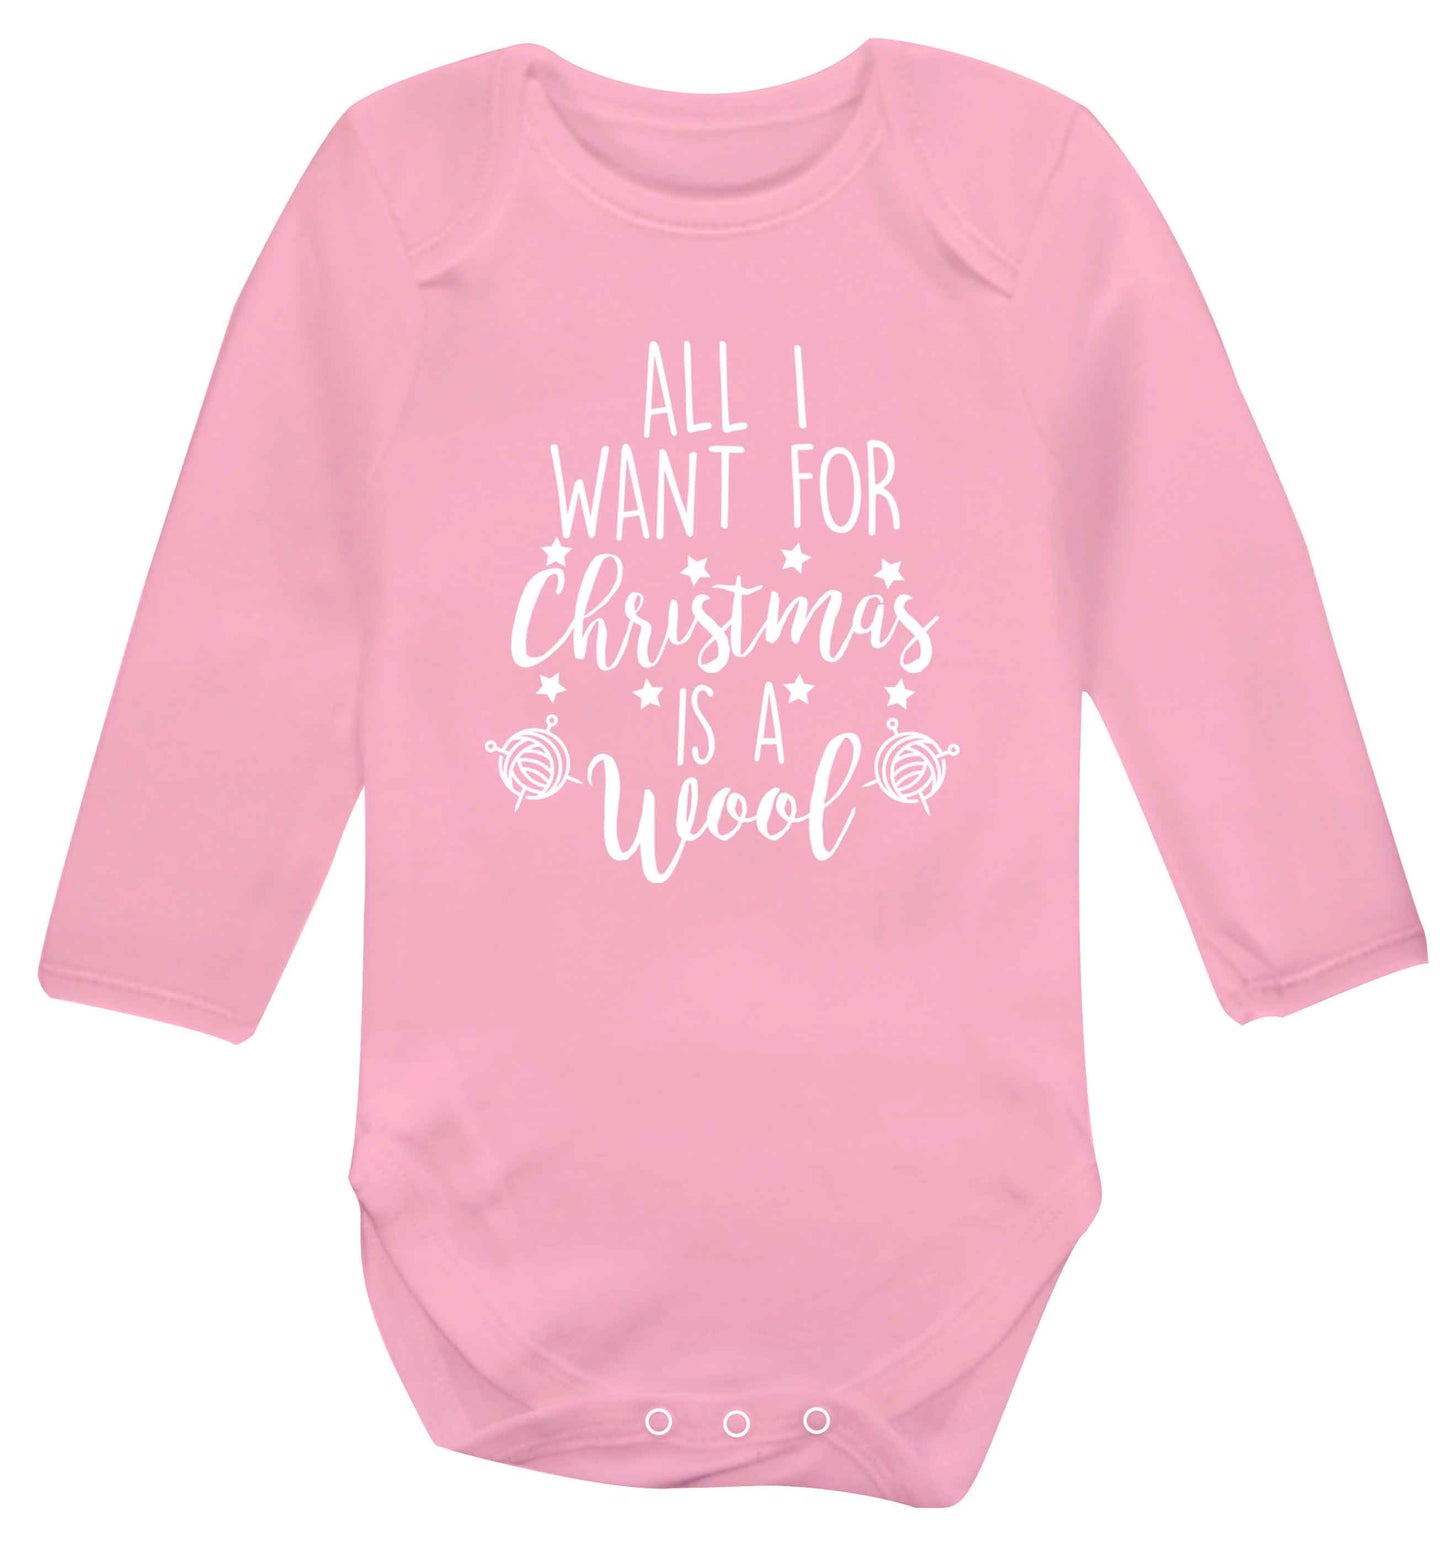 All I want for Christmas is wool! Baby Vest long sleeved pale pink 6-12 months